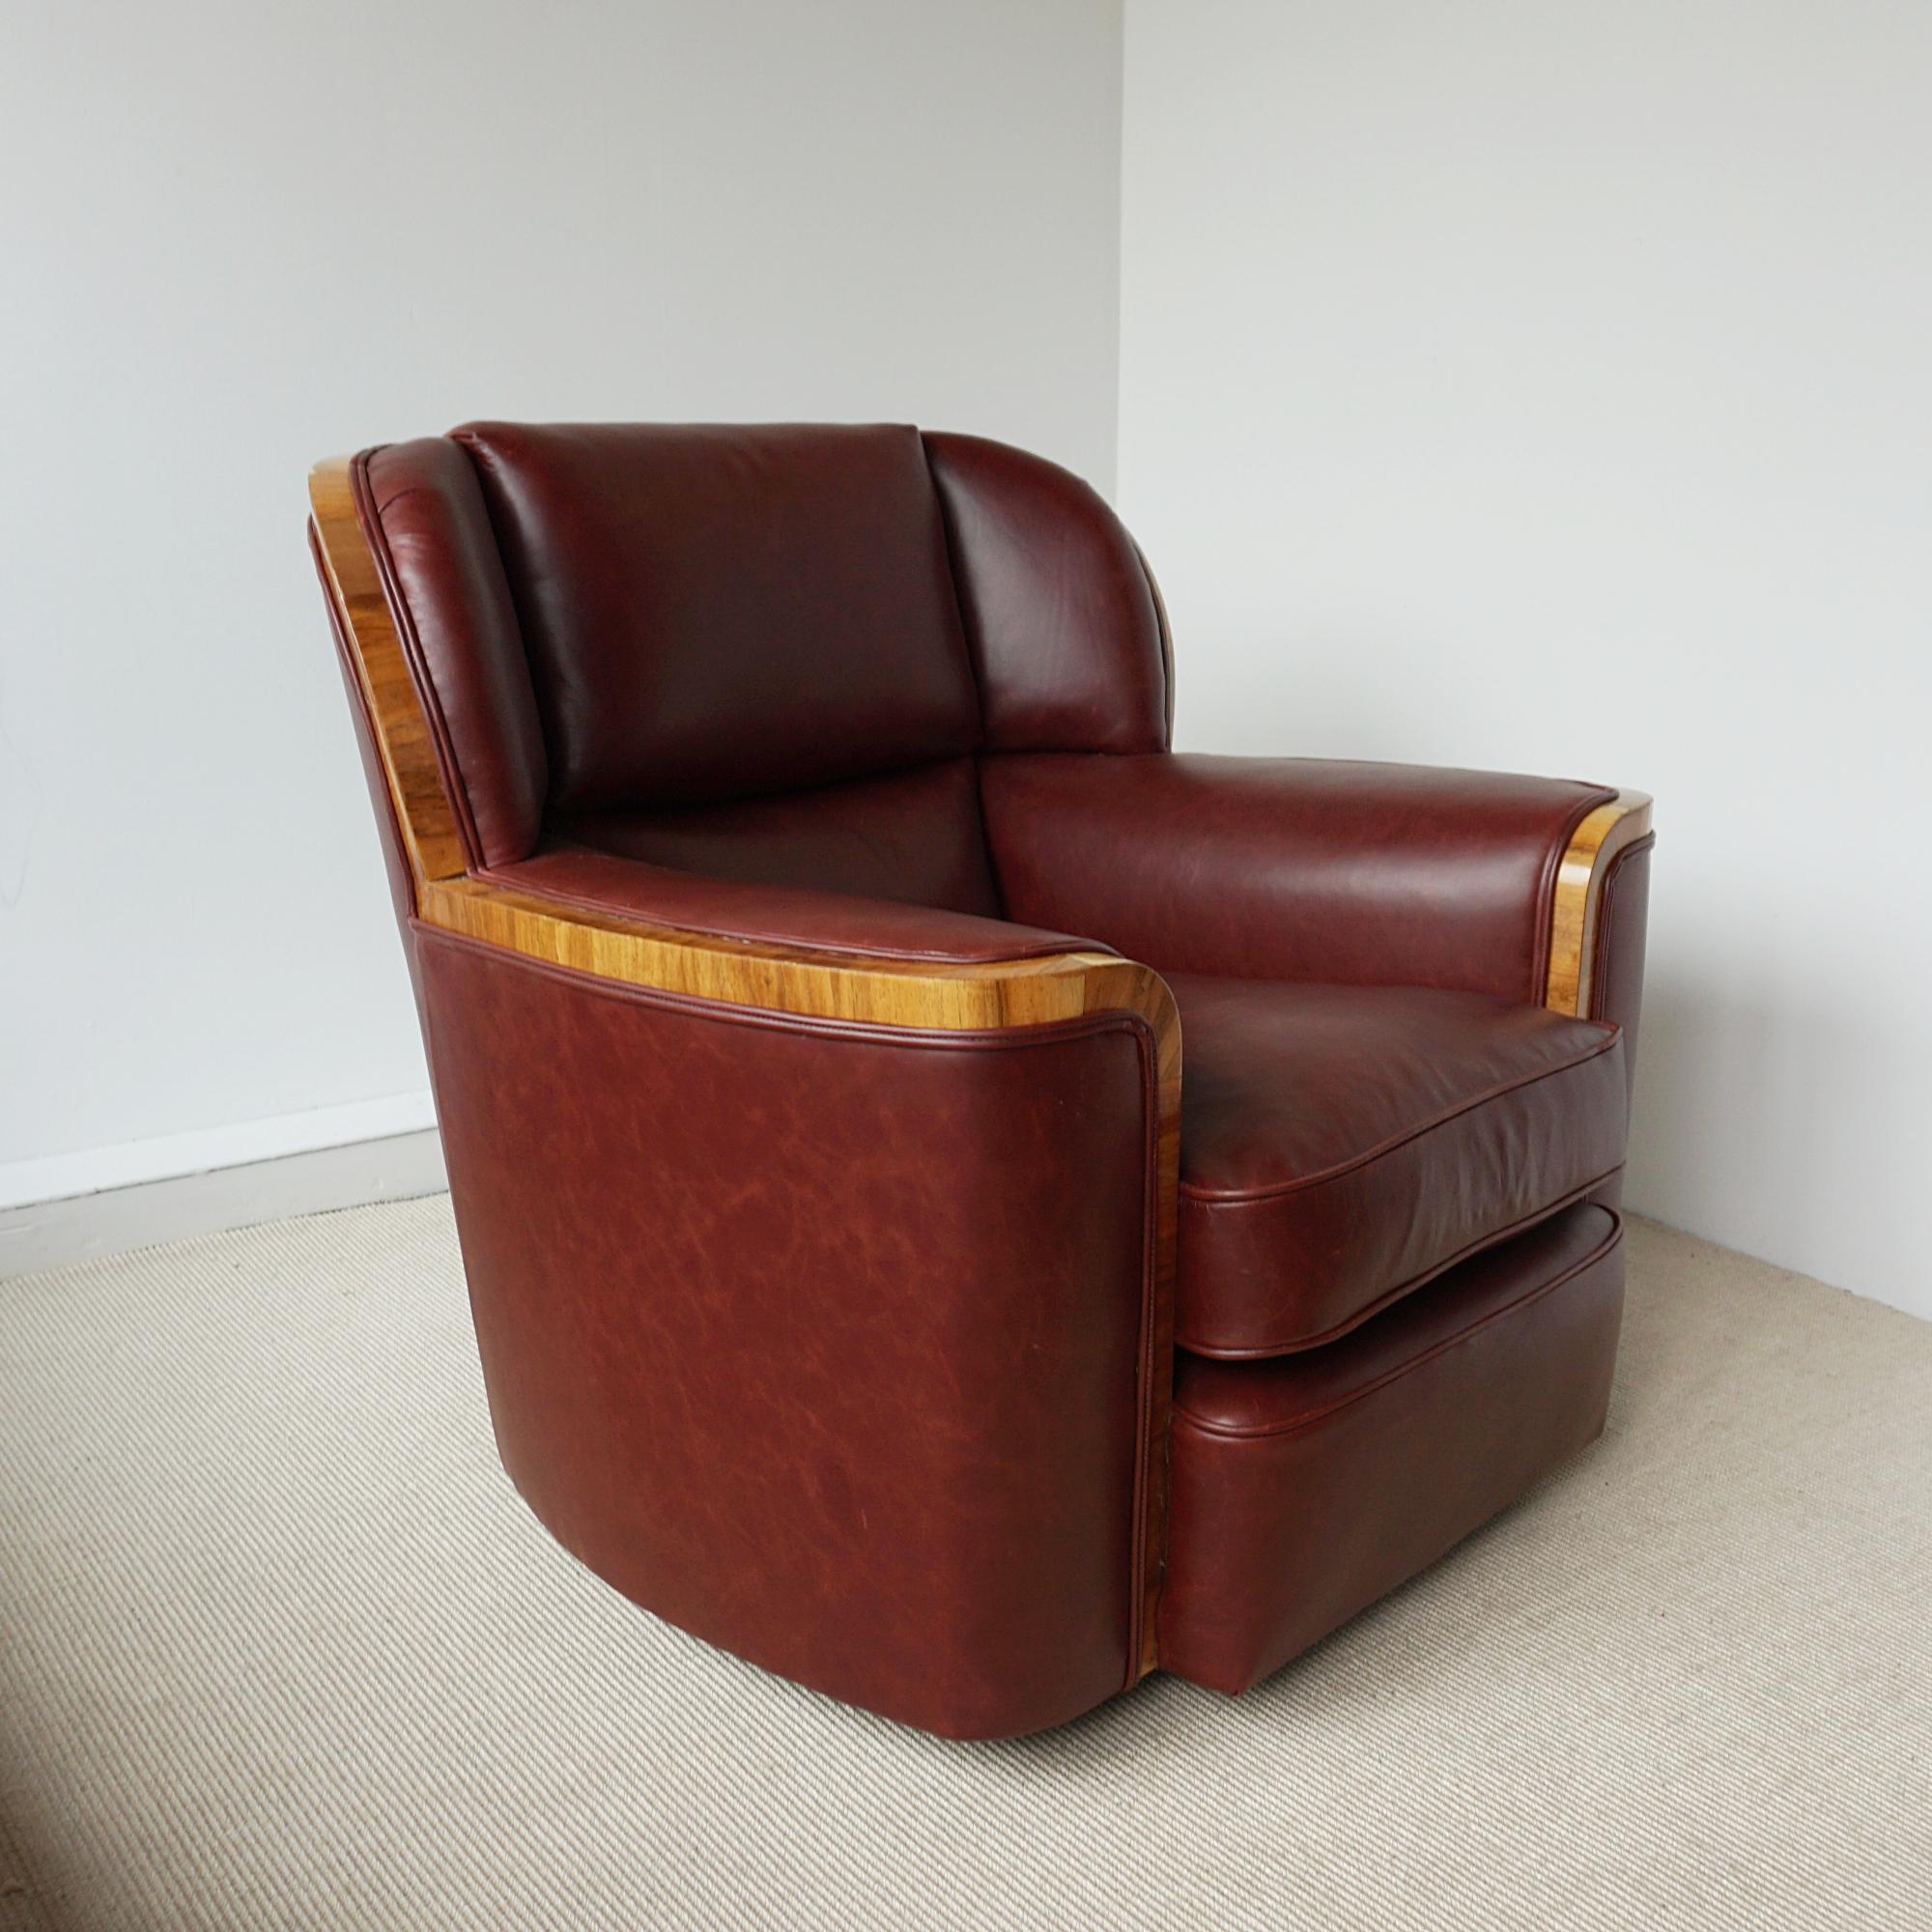 Original Art Deco Chestnut Leather and Walnut Bankers Armchairs  In Good Condition For Sale In Forest Row, East Sussex